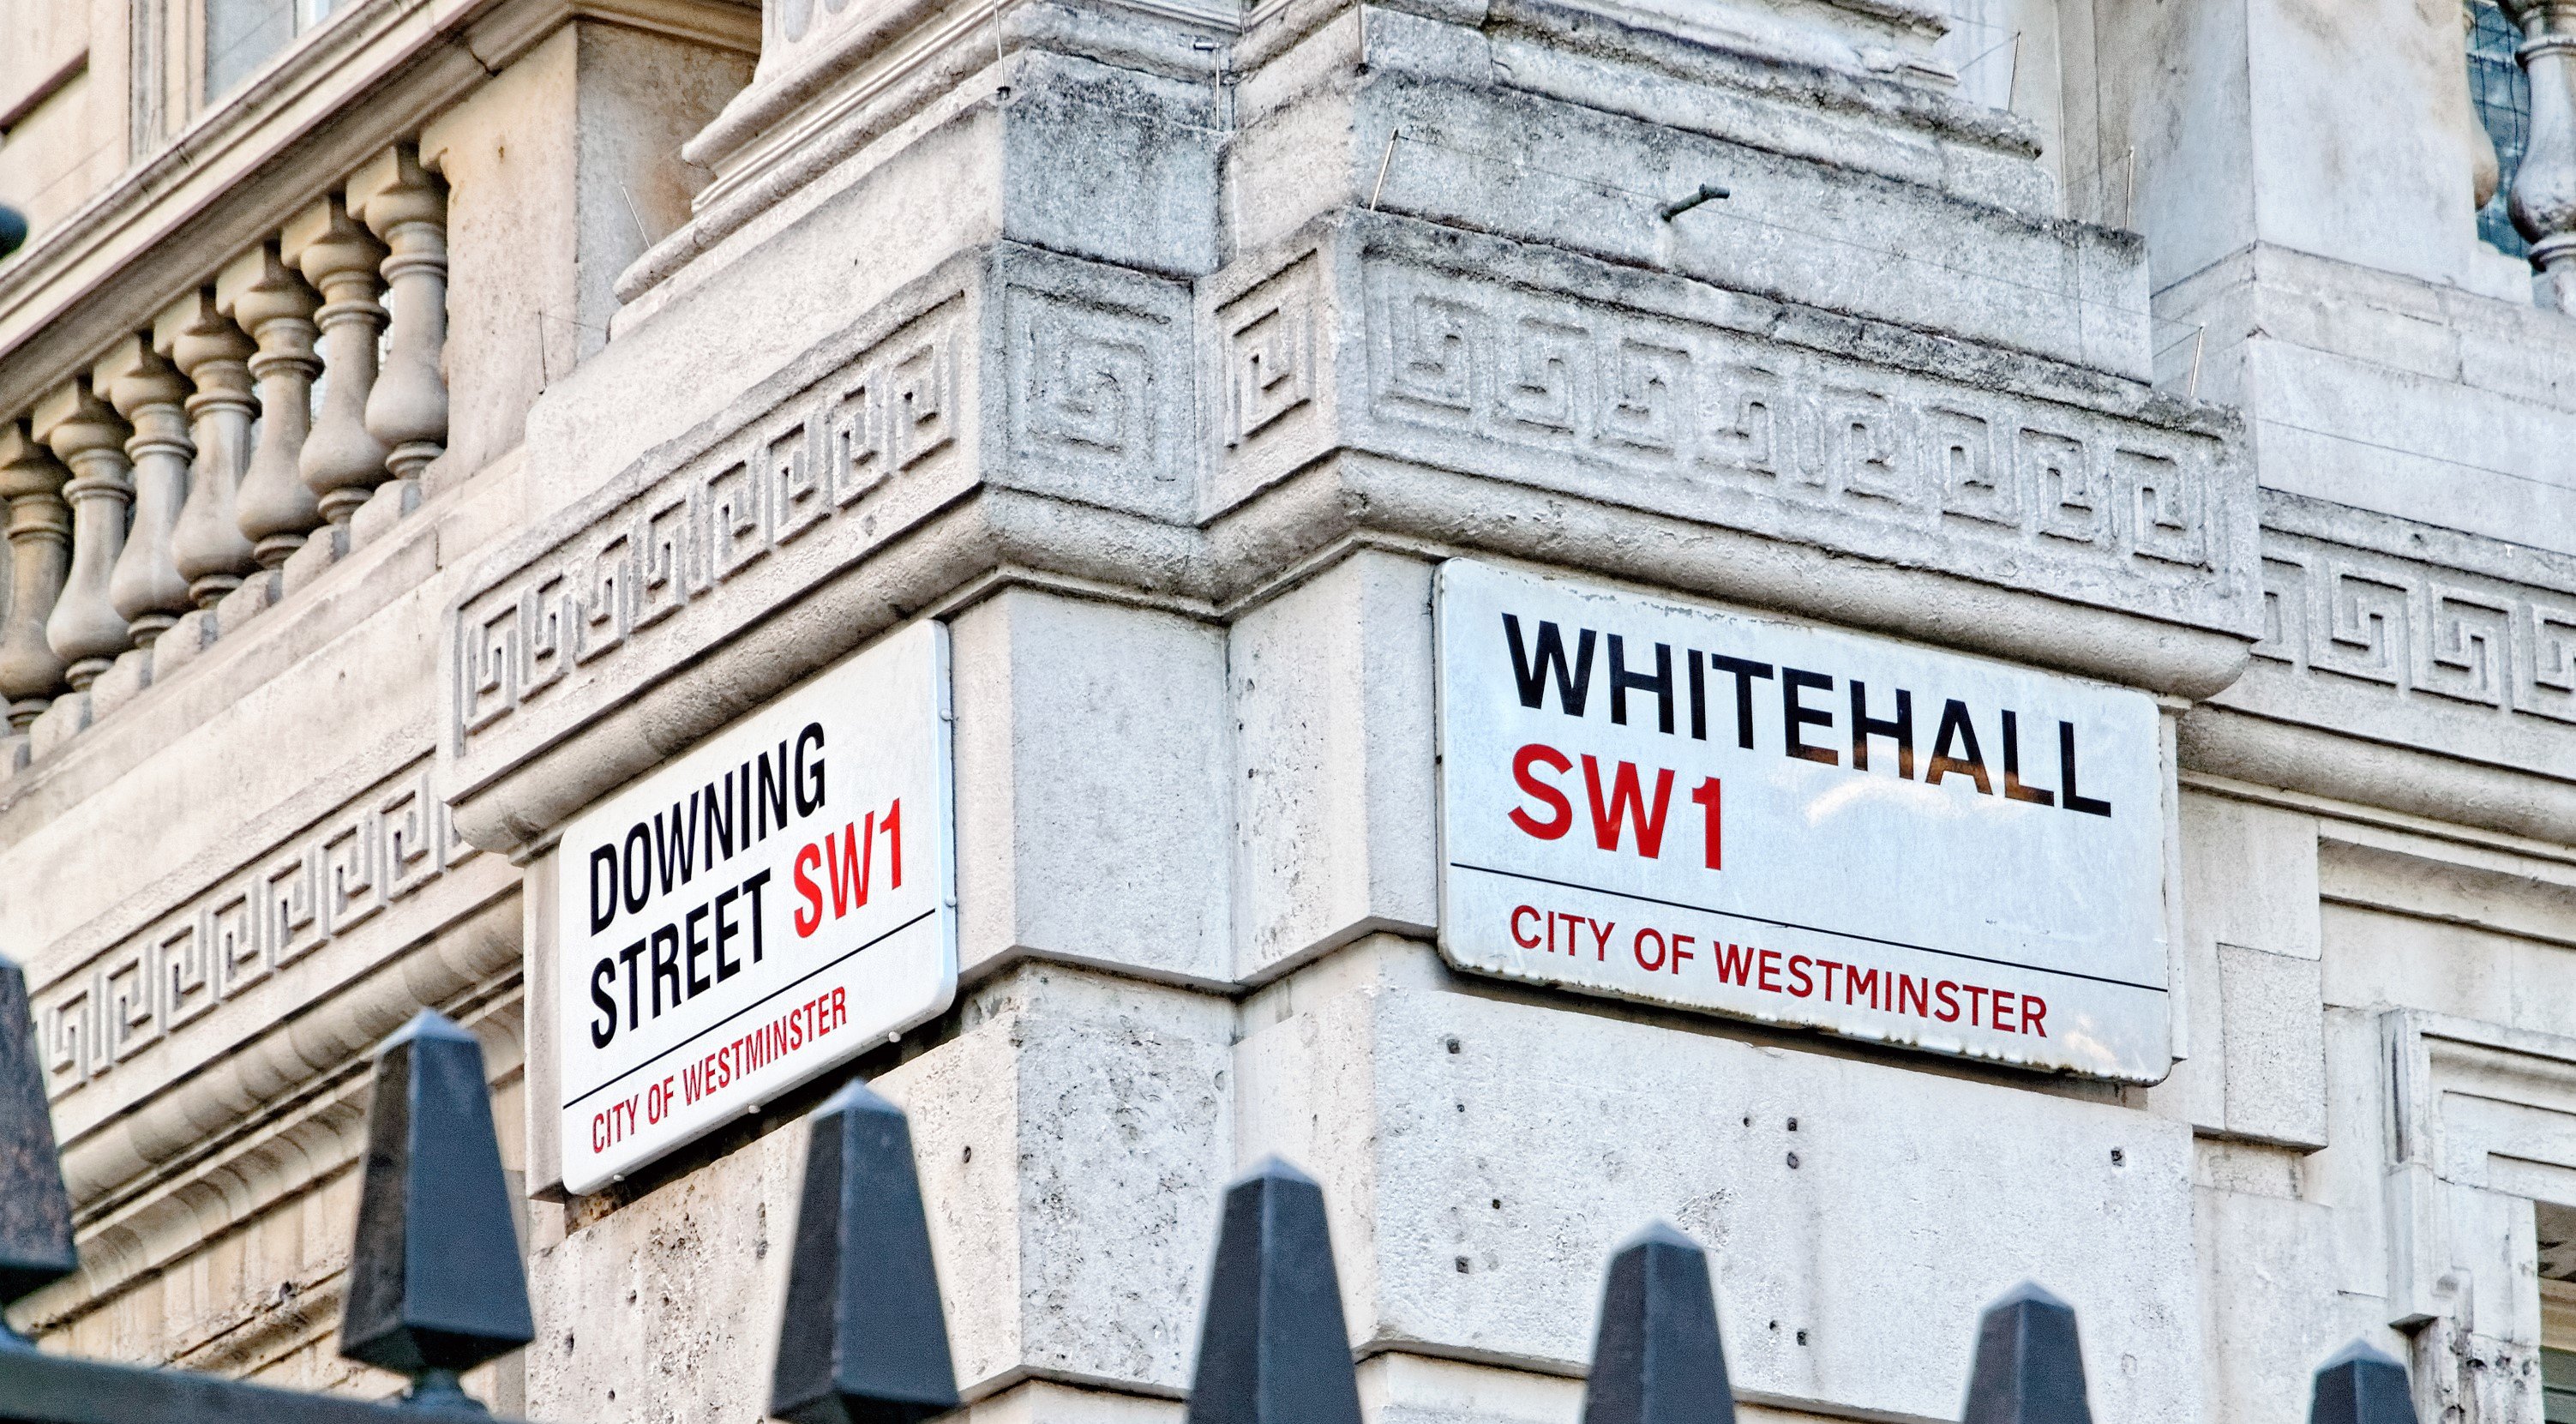 London street sign, Downing Street and Whitehall